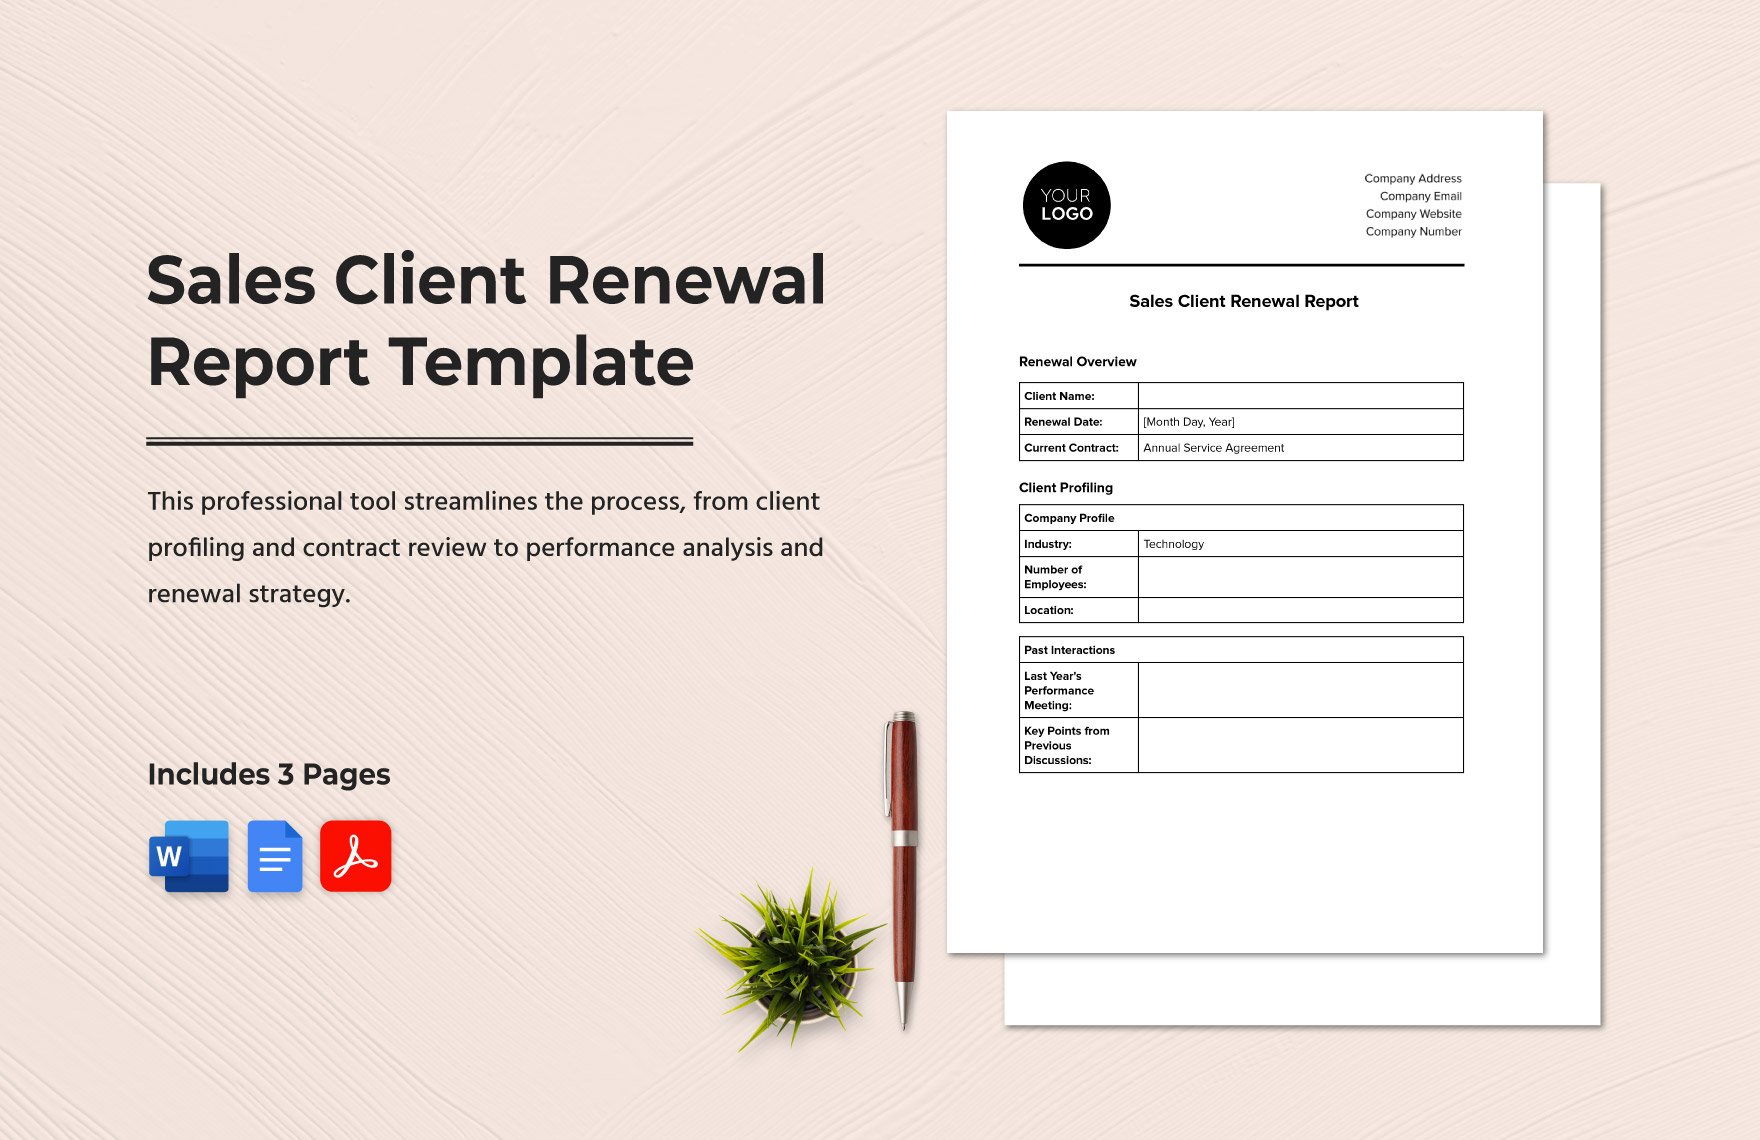 Sales Client Renewal Report Template in Word, Google Docs, PDF